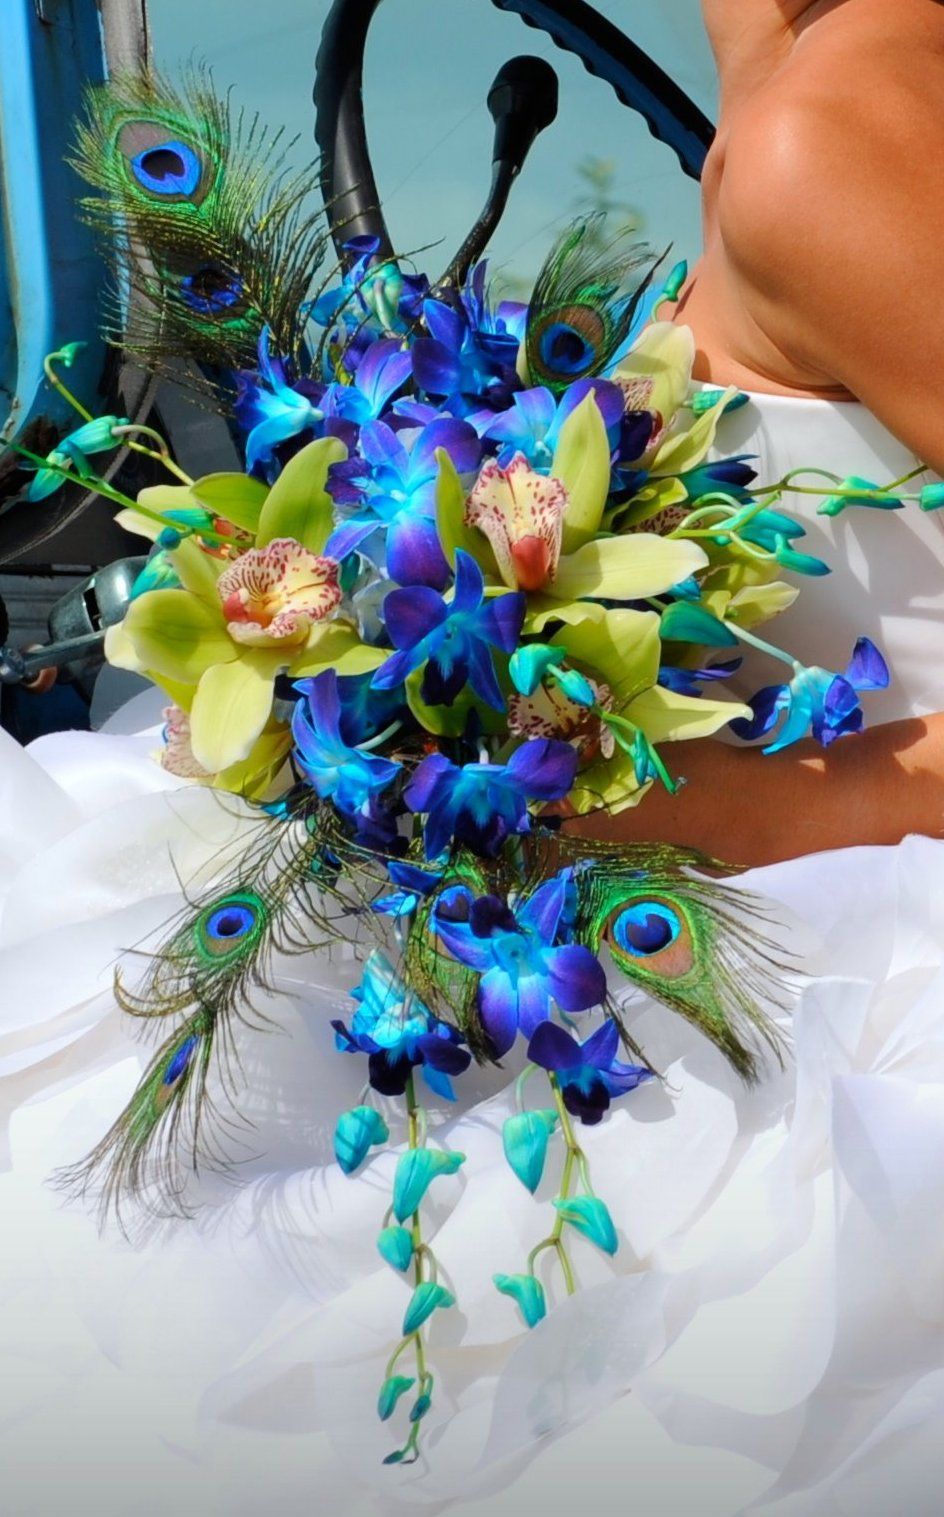 Great use of dyed  dendrobium orchids….. Pretty!